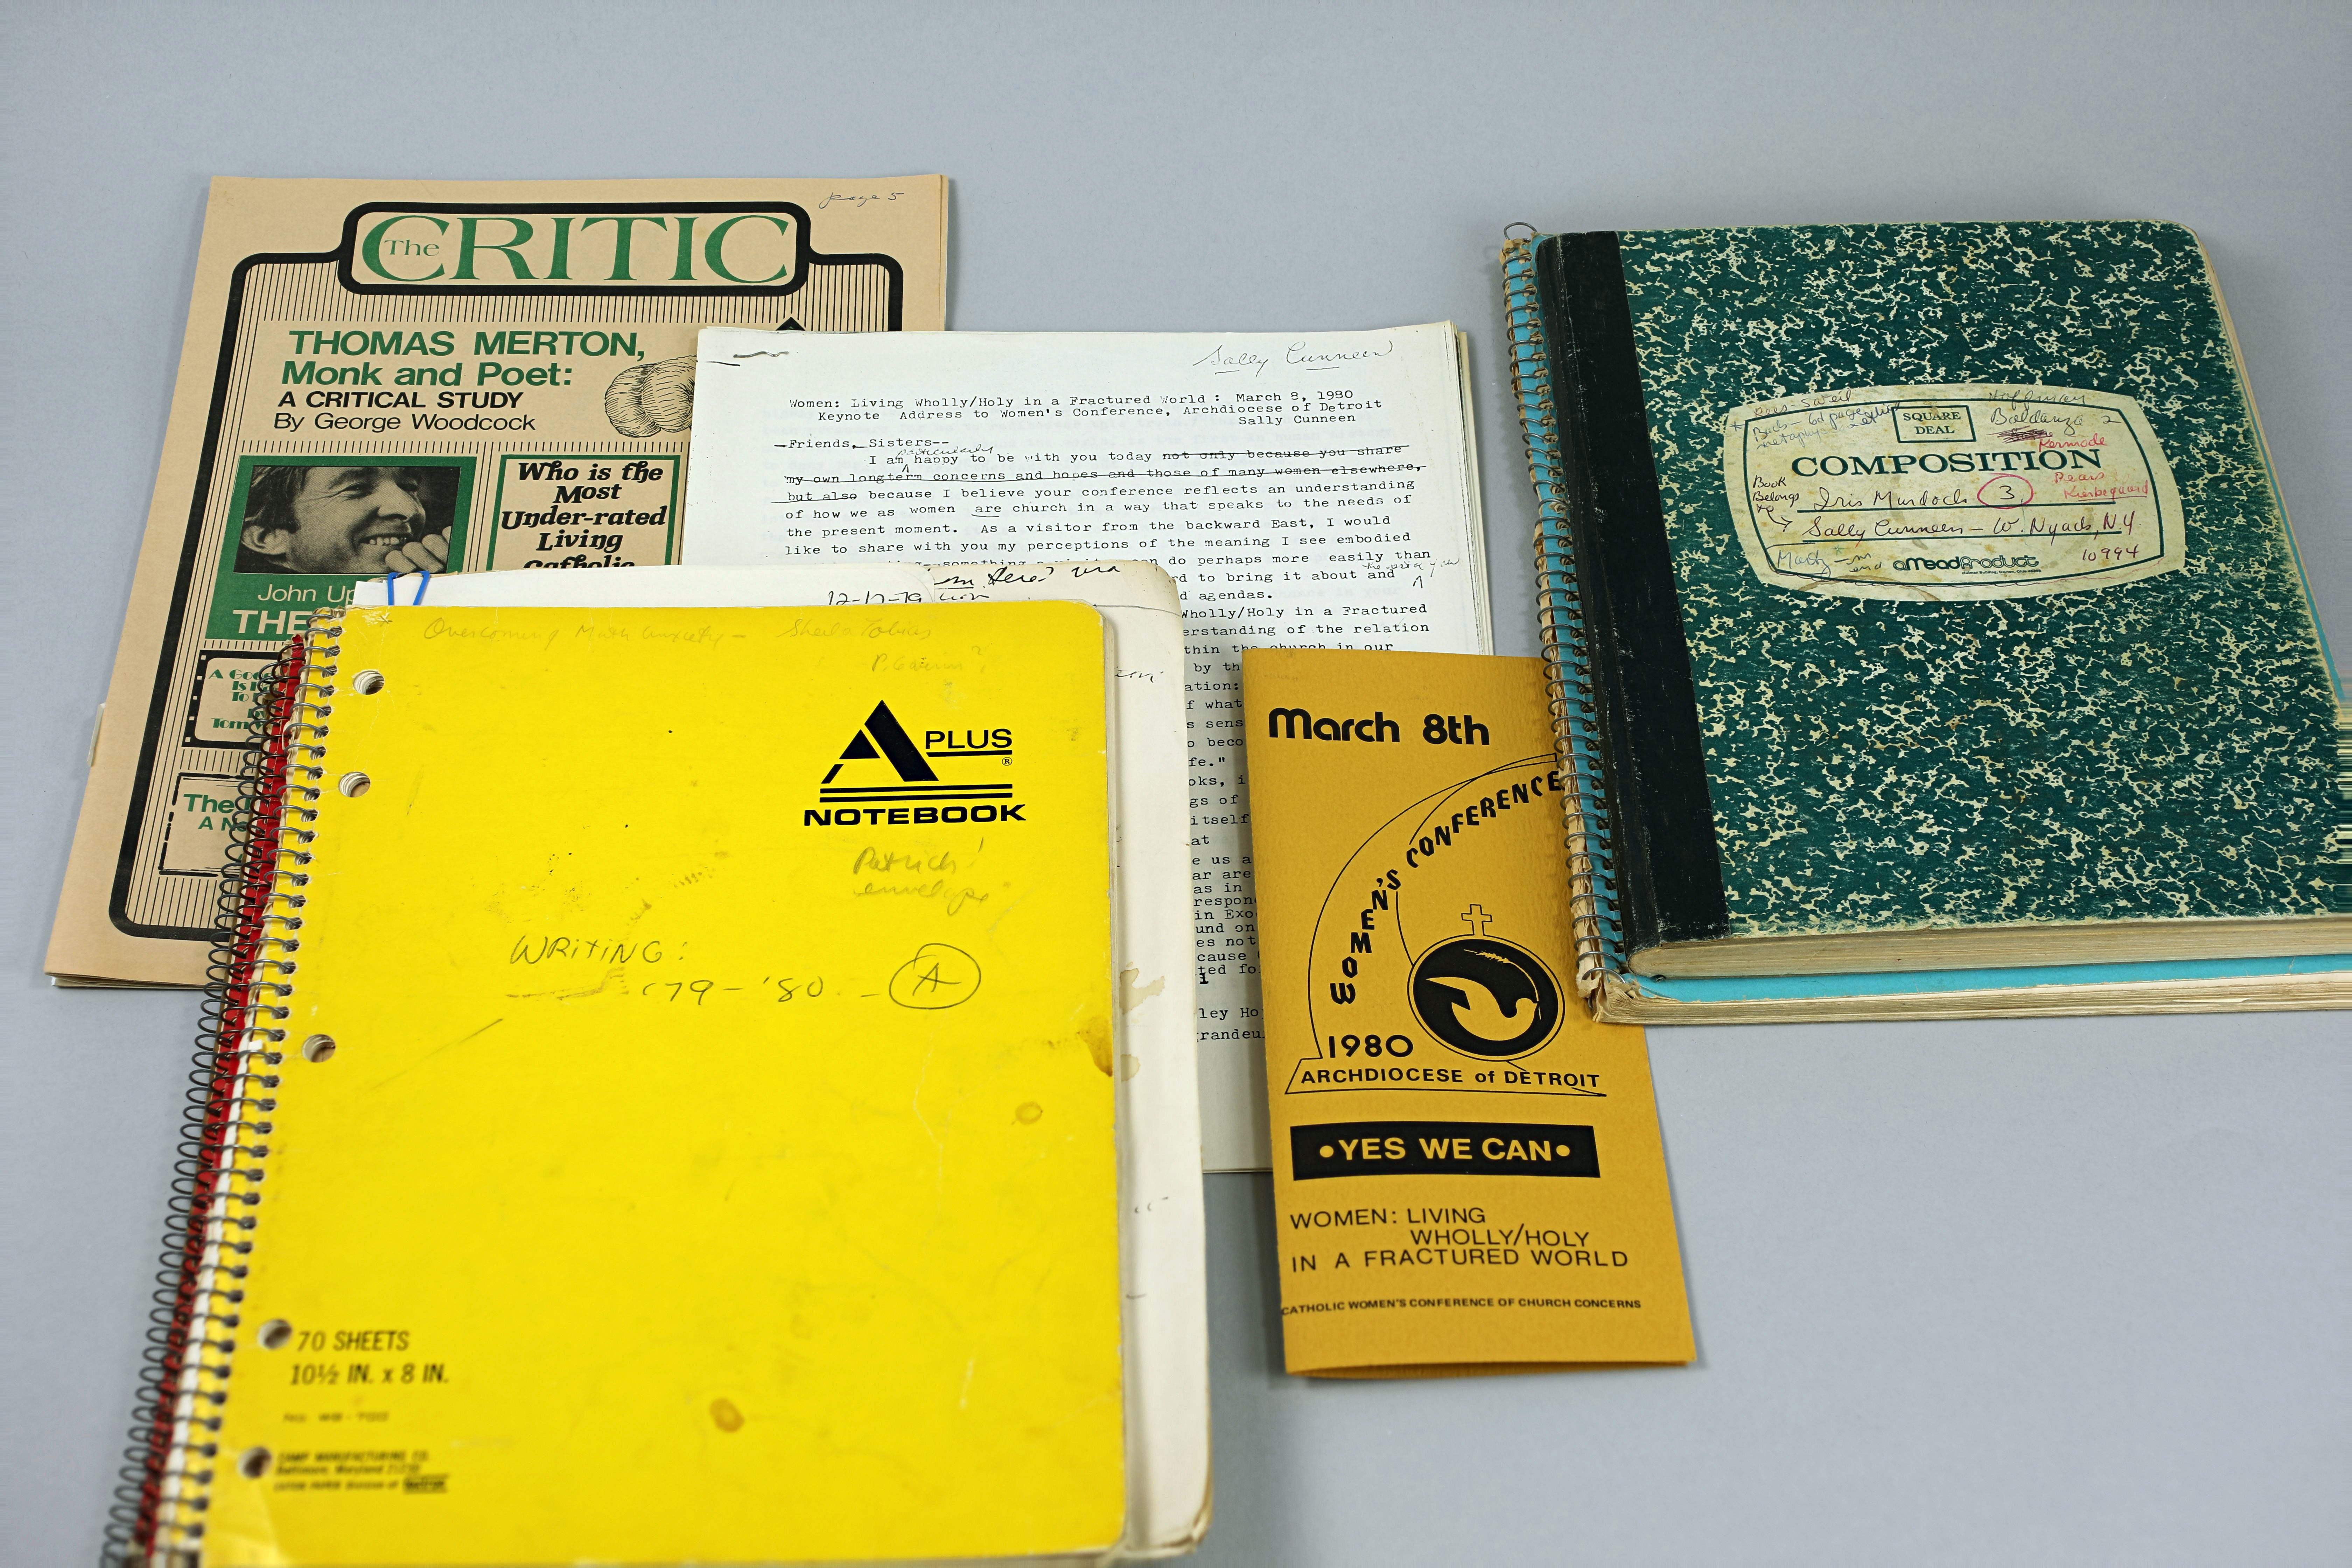 Items from the Sally Cunneen papers archived in the Marian Library